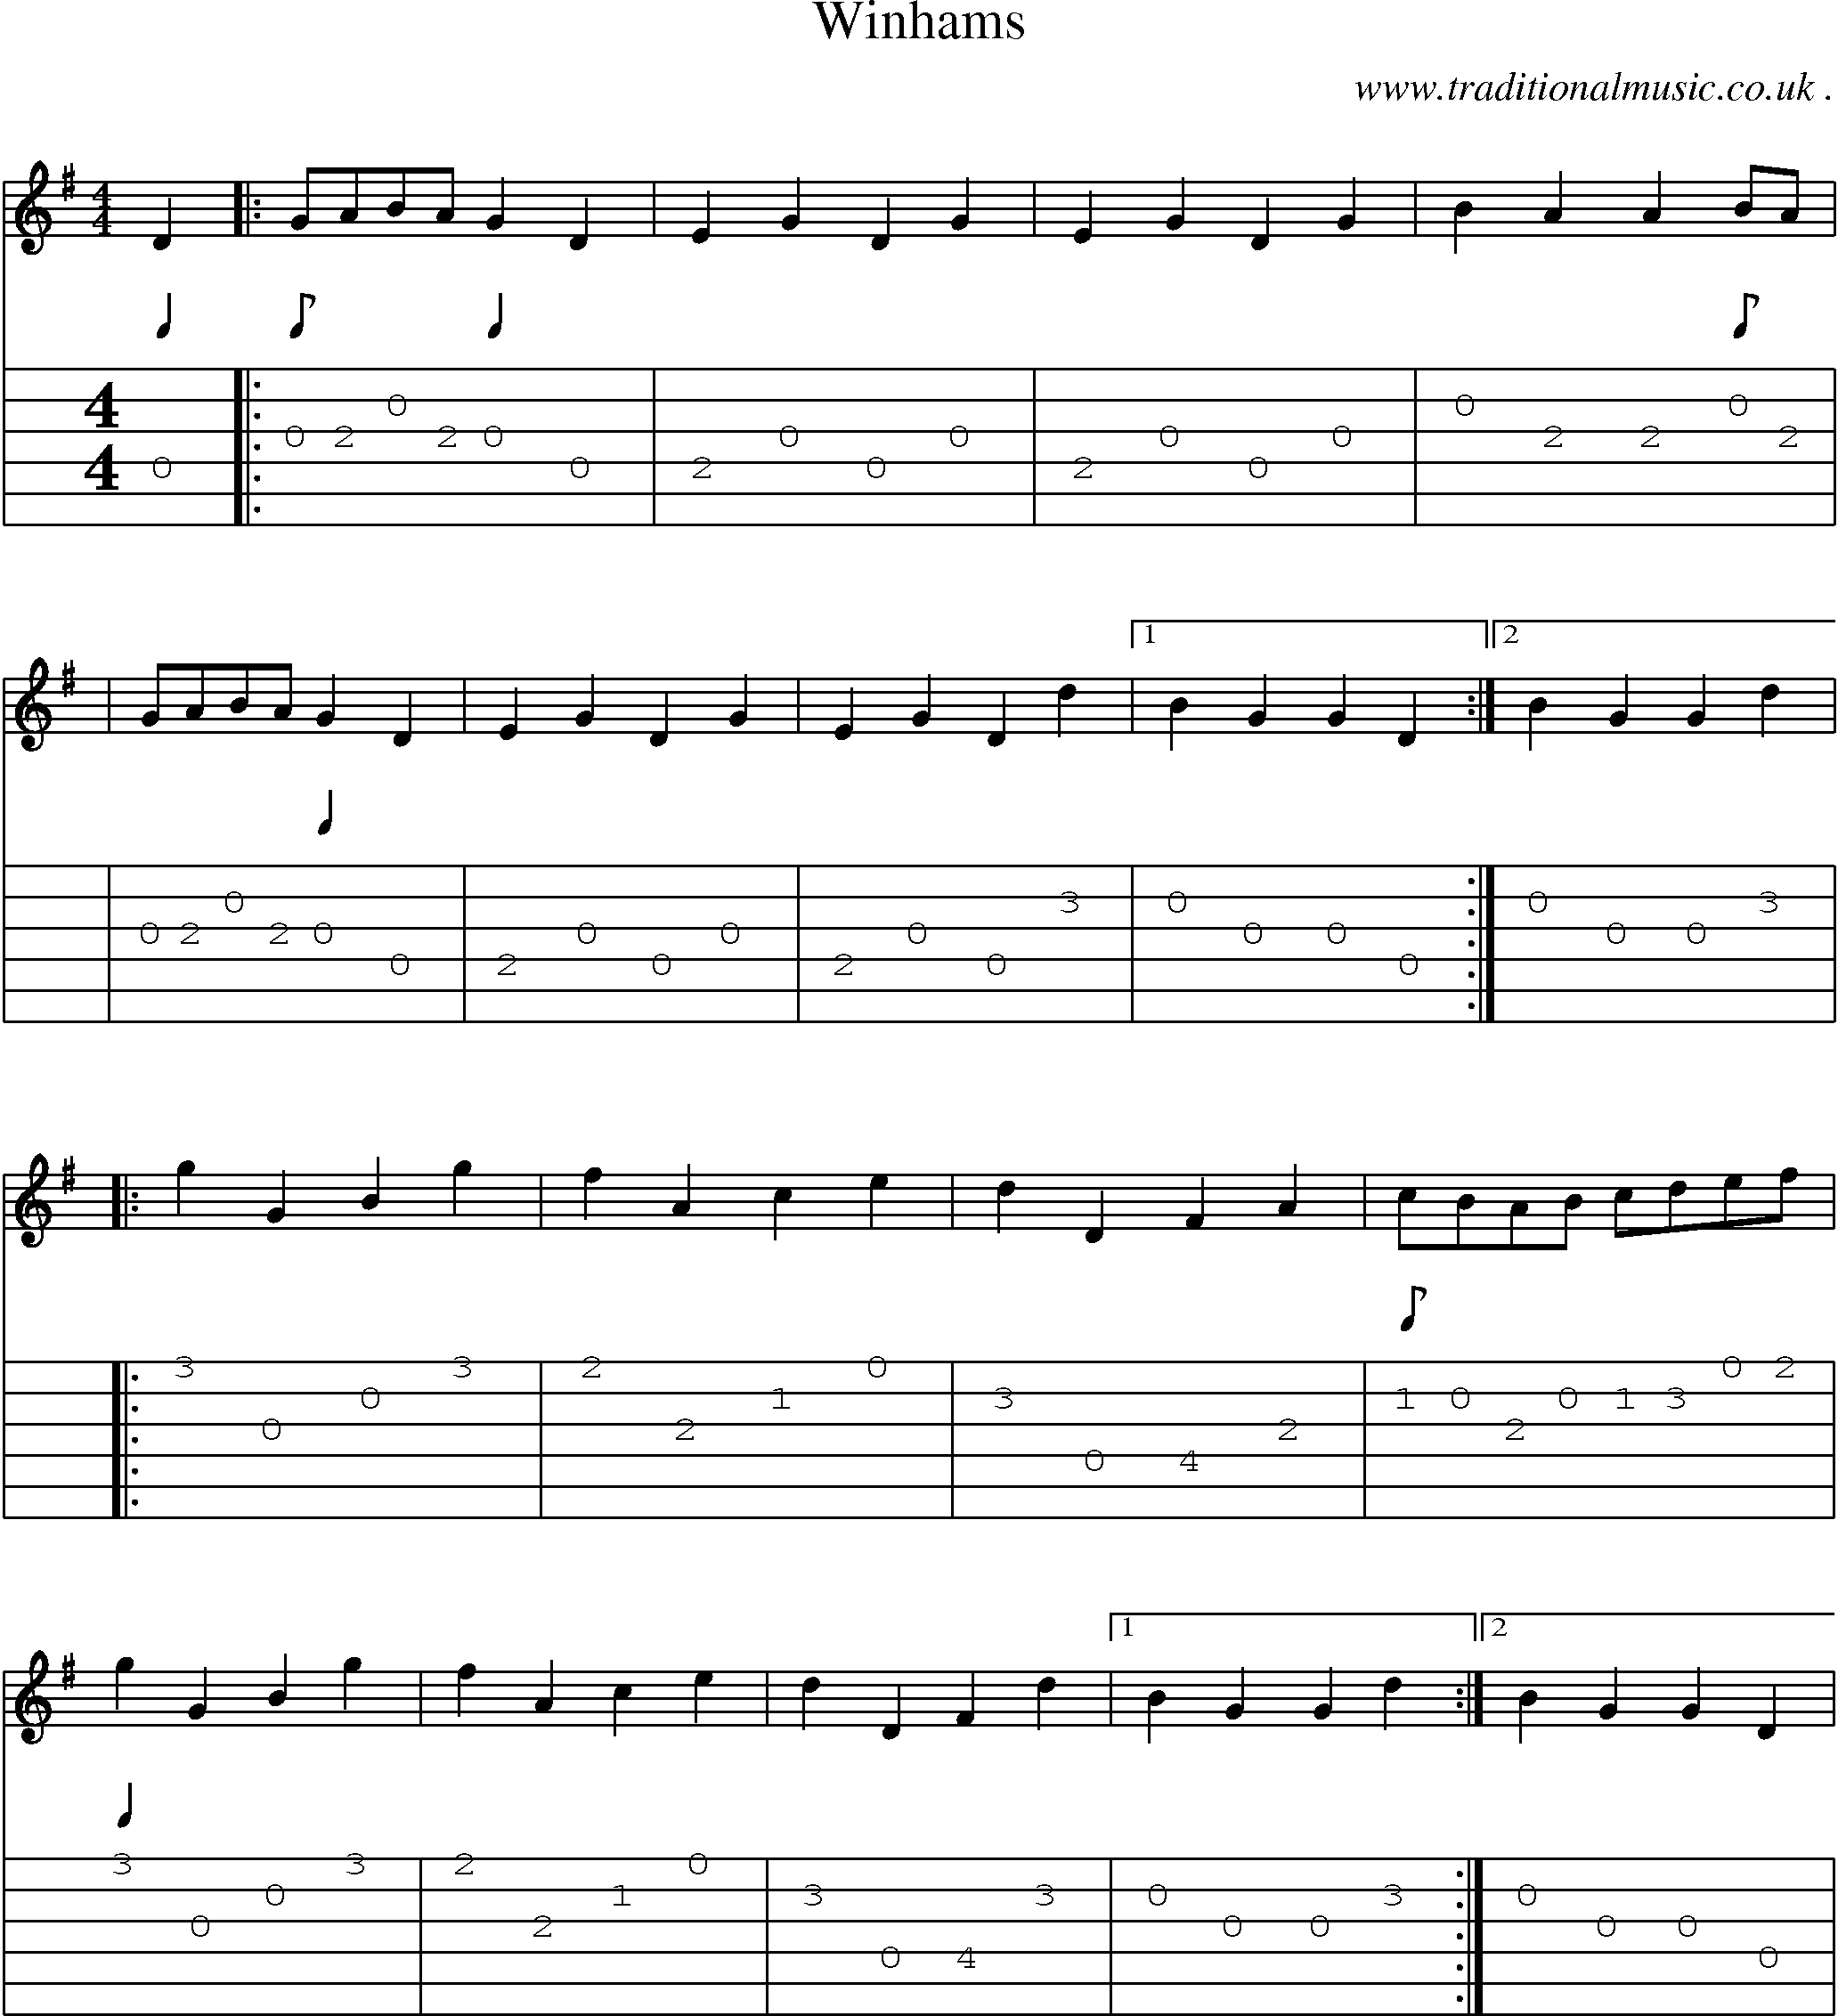 Sheet-Music and Guitar Tabs for Winhams